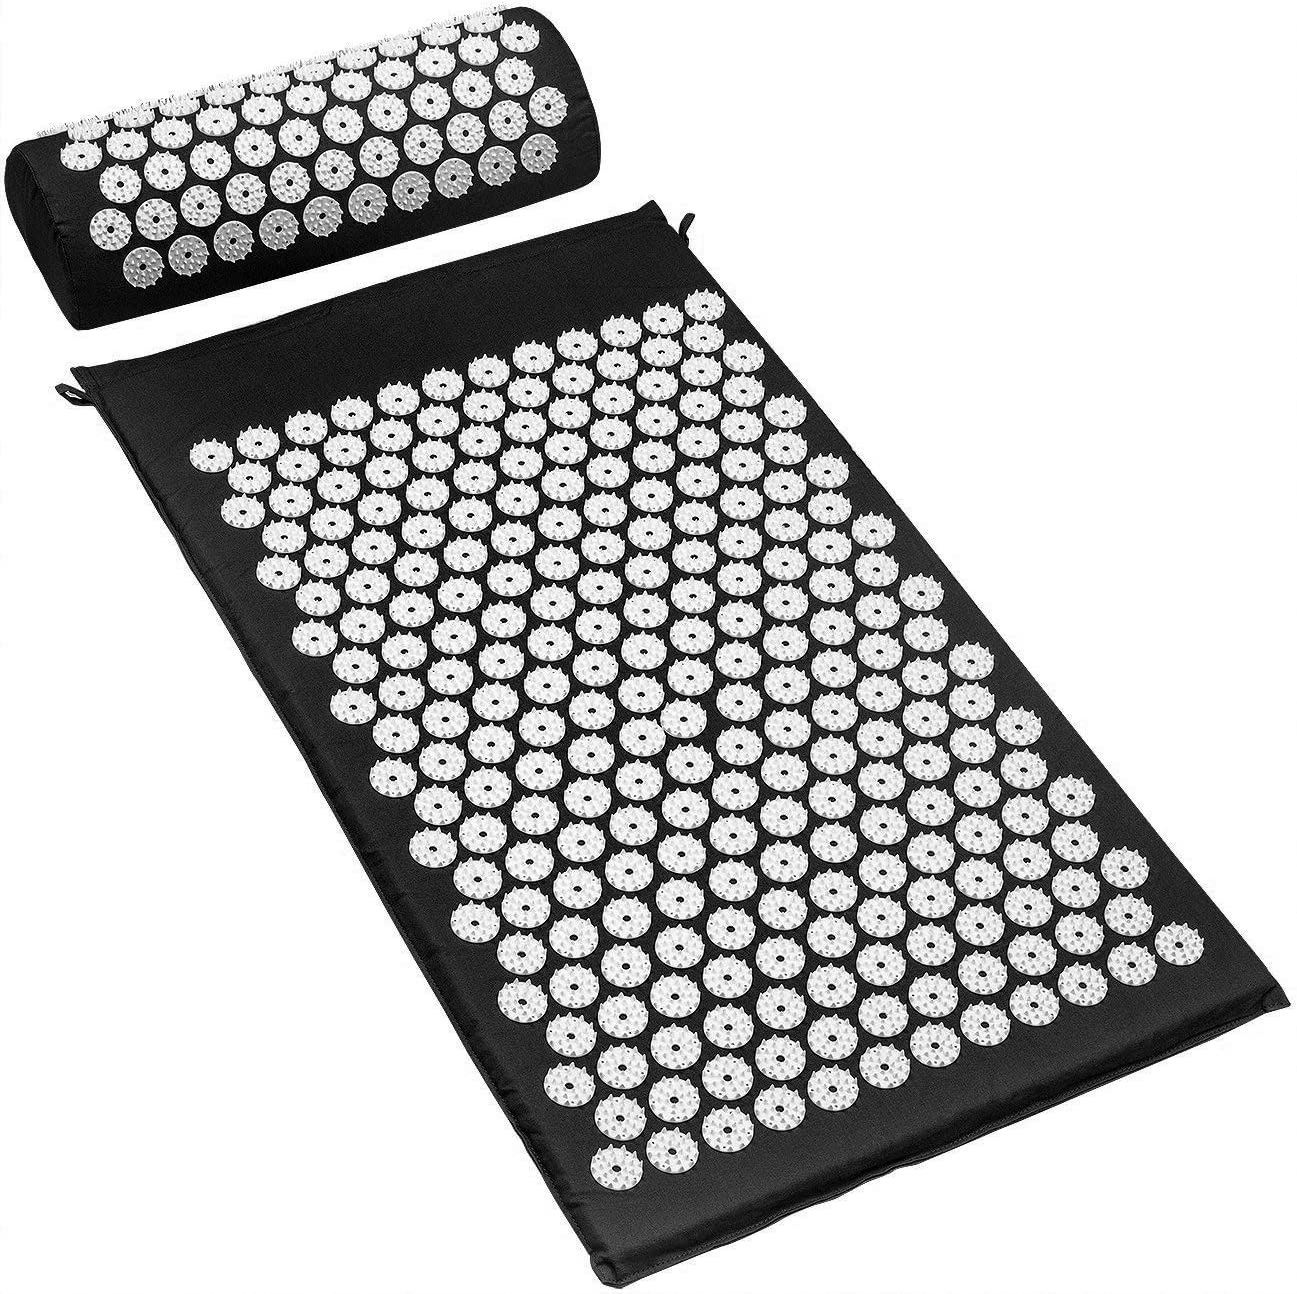 Sivan Health And Fitness Deluxe Acupressure Mat & Pillow Combo Set, Green - image 1 of 7